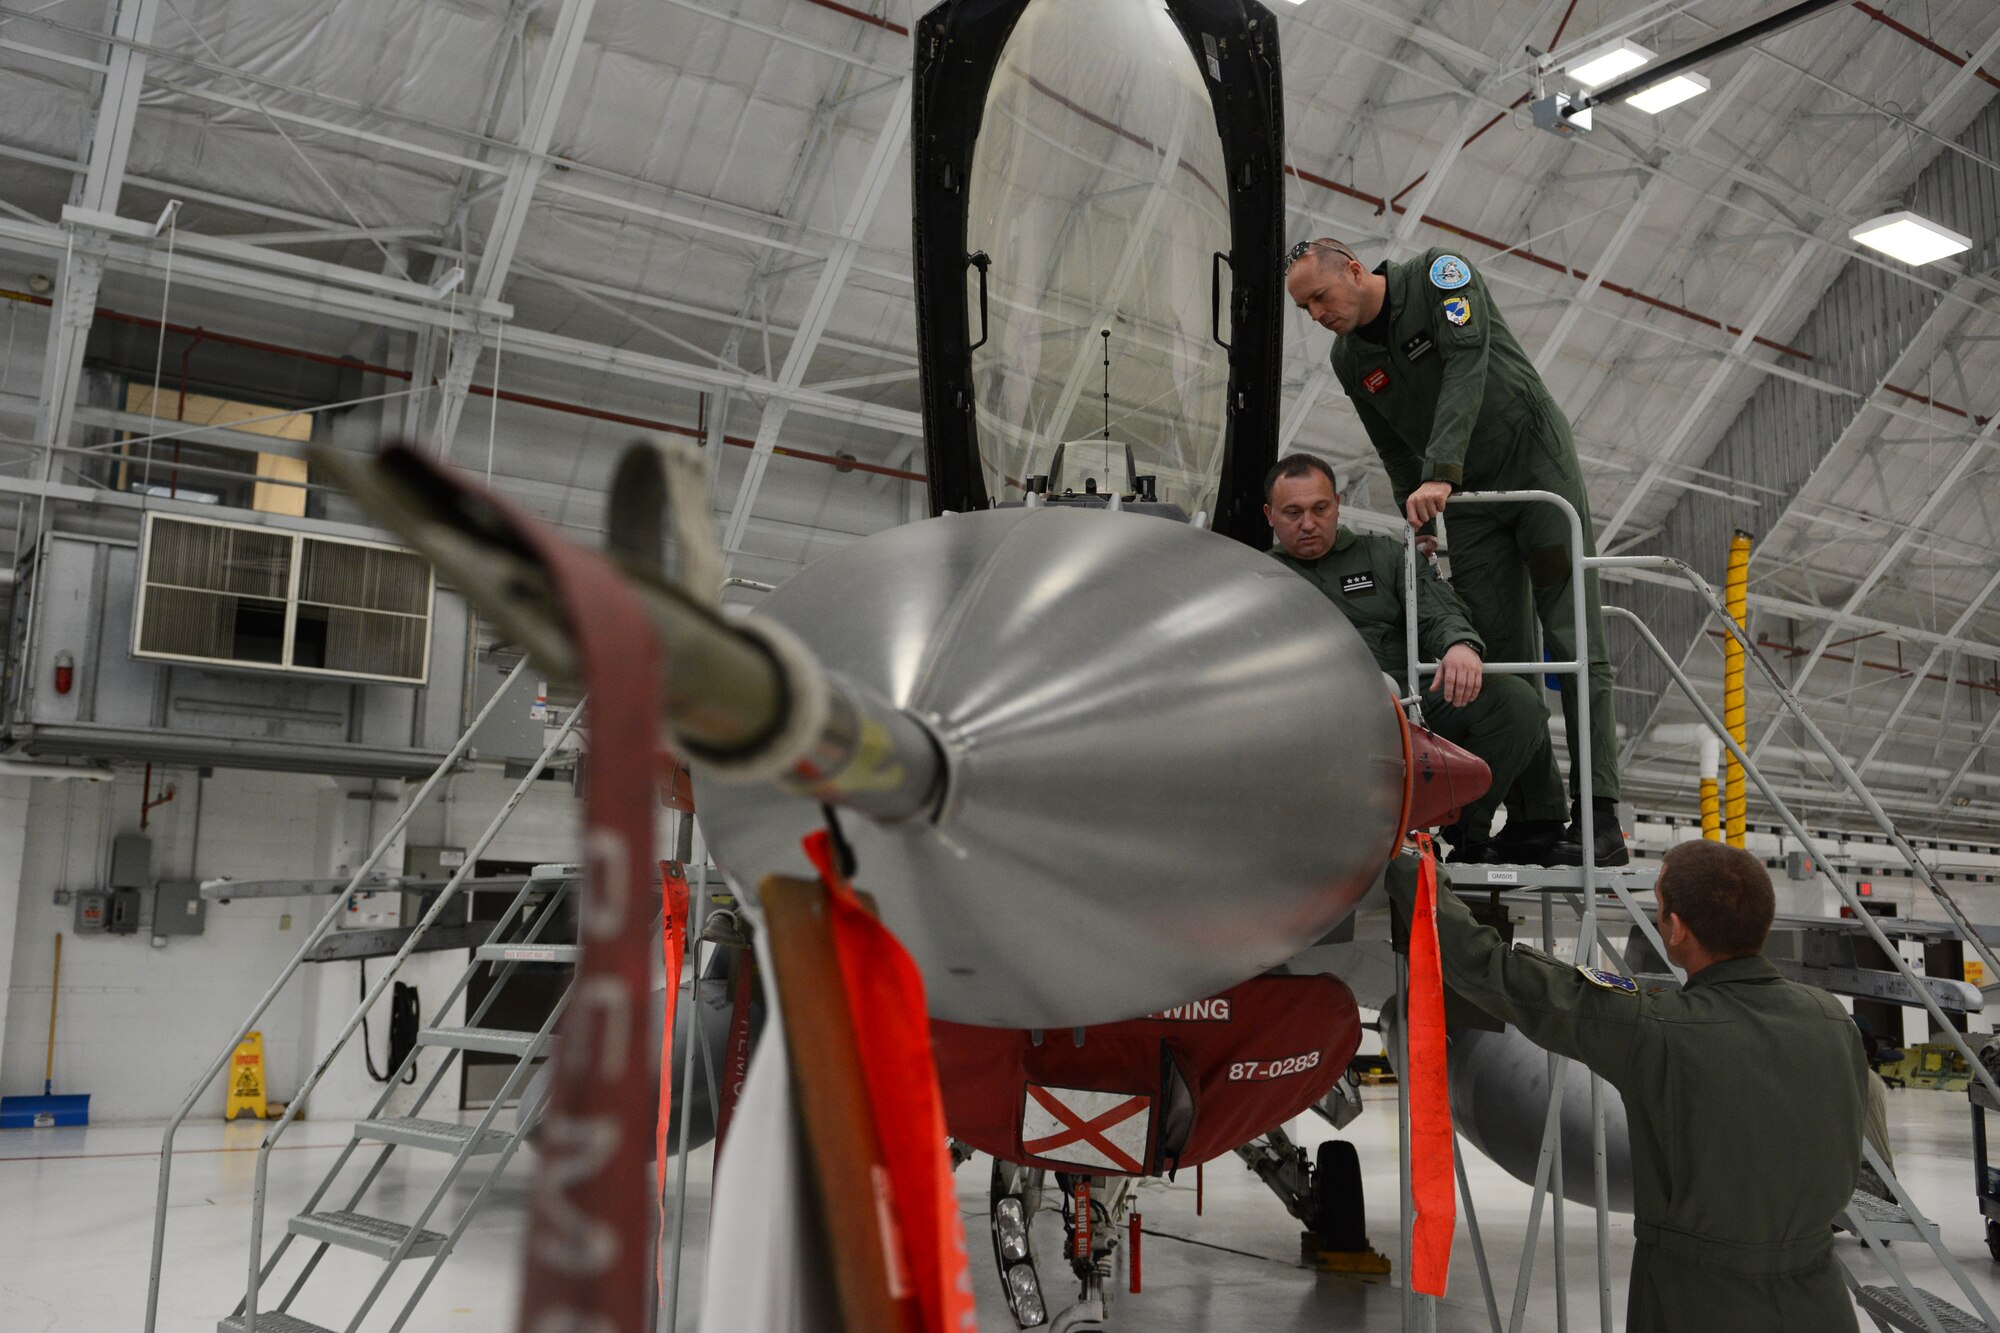 Members of the Polish Air Force spend time looking at aircraft in the phase hangar at the 115th Fighter Wing in Madison, Wis., May 4, 2015. Two pilots and three maintainers from Poland spent the week learning about the differences between their air force and the Air National Guard as a part of the State Partnership Program. (U.S. Air National Guard photo by Senior Airman Andrea F. Rhode)